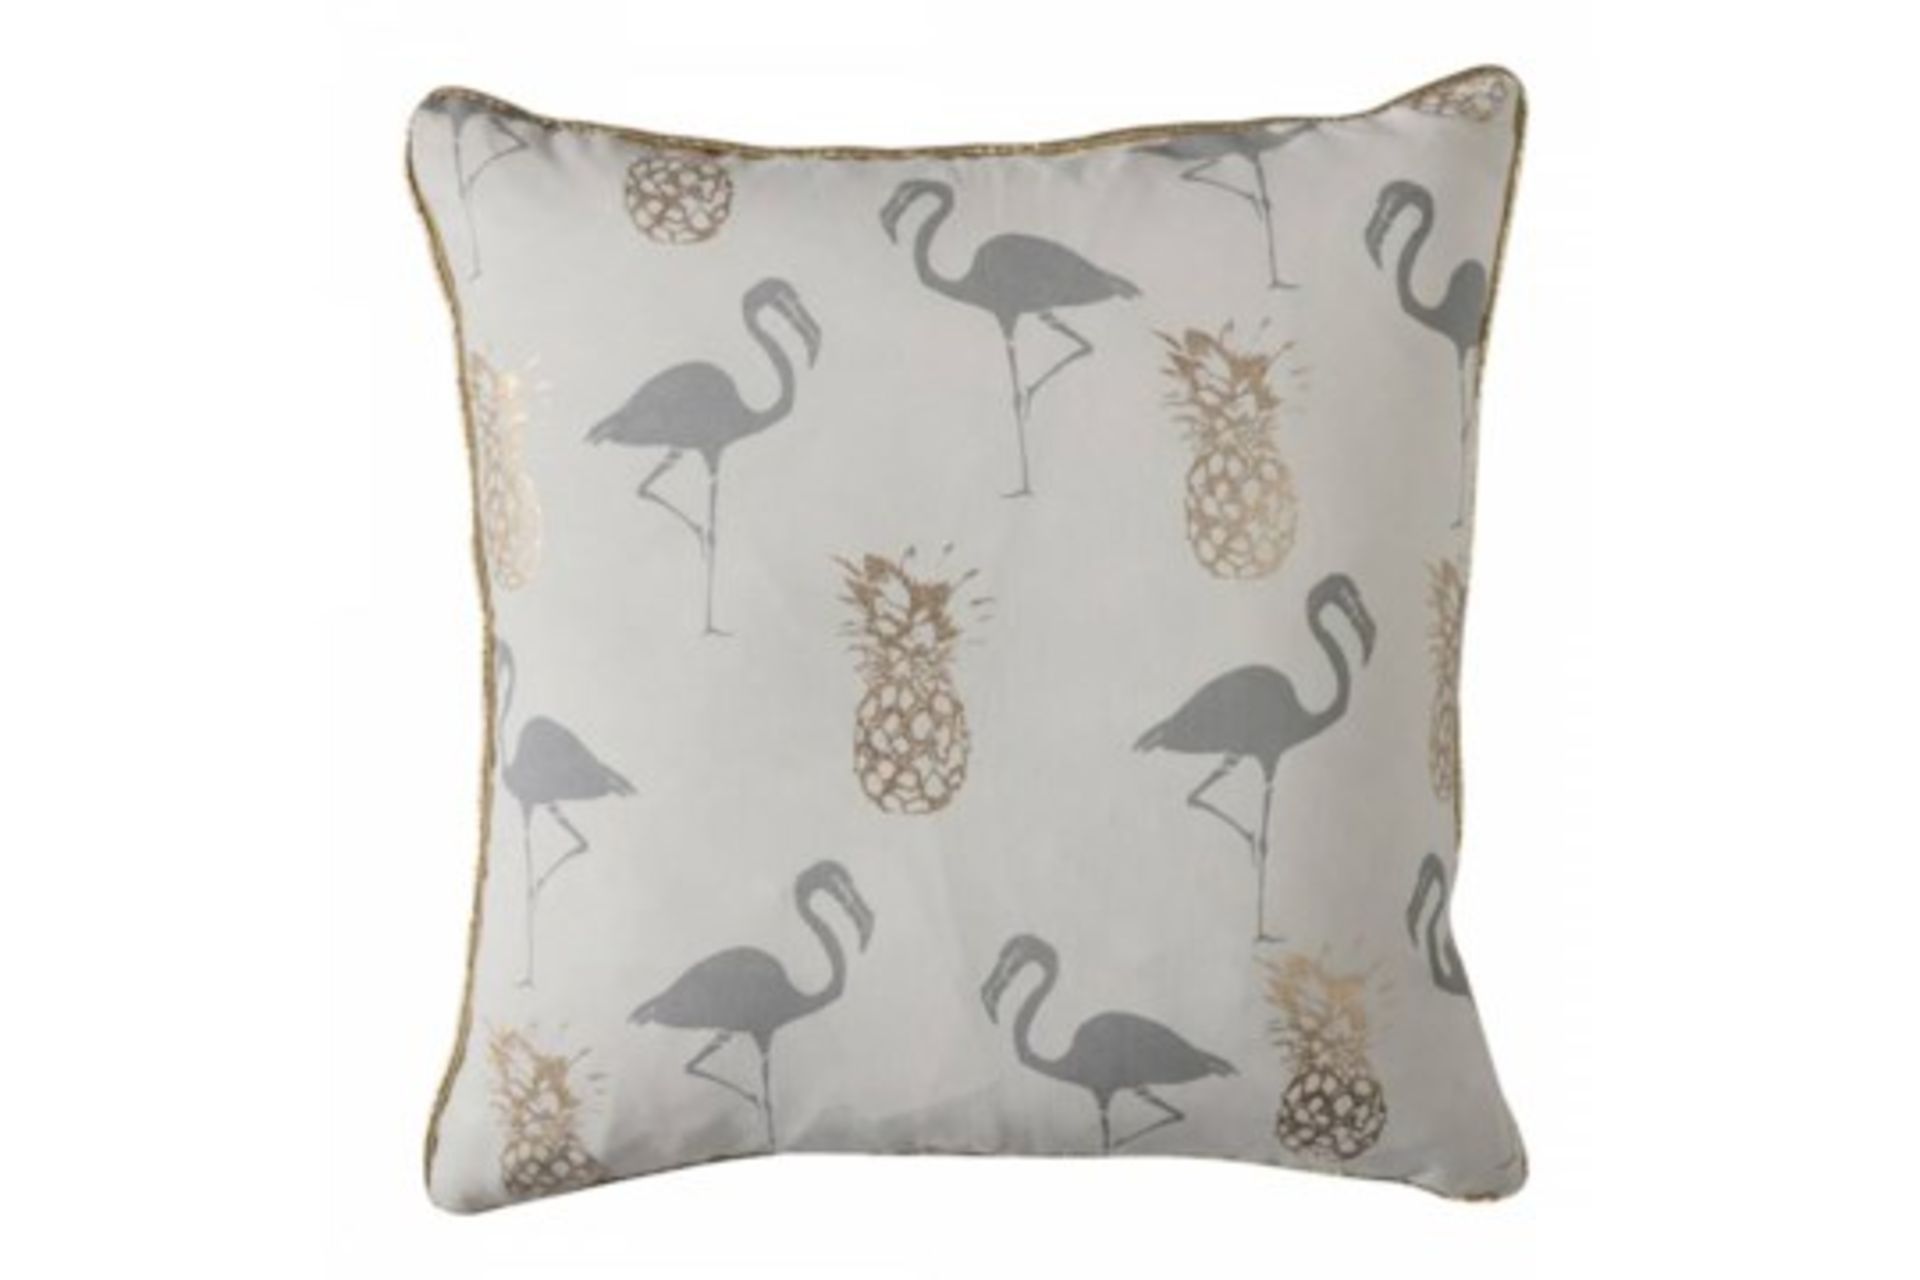 4 x Flamingo & Pineapples Cushion Grey Quirky Design With Flamingo Silhouette And Metallic Pineapple